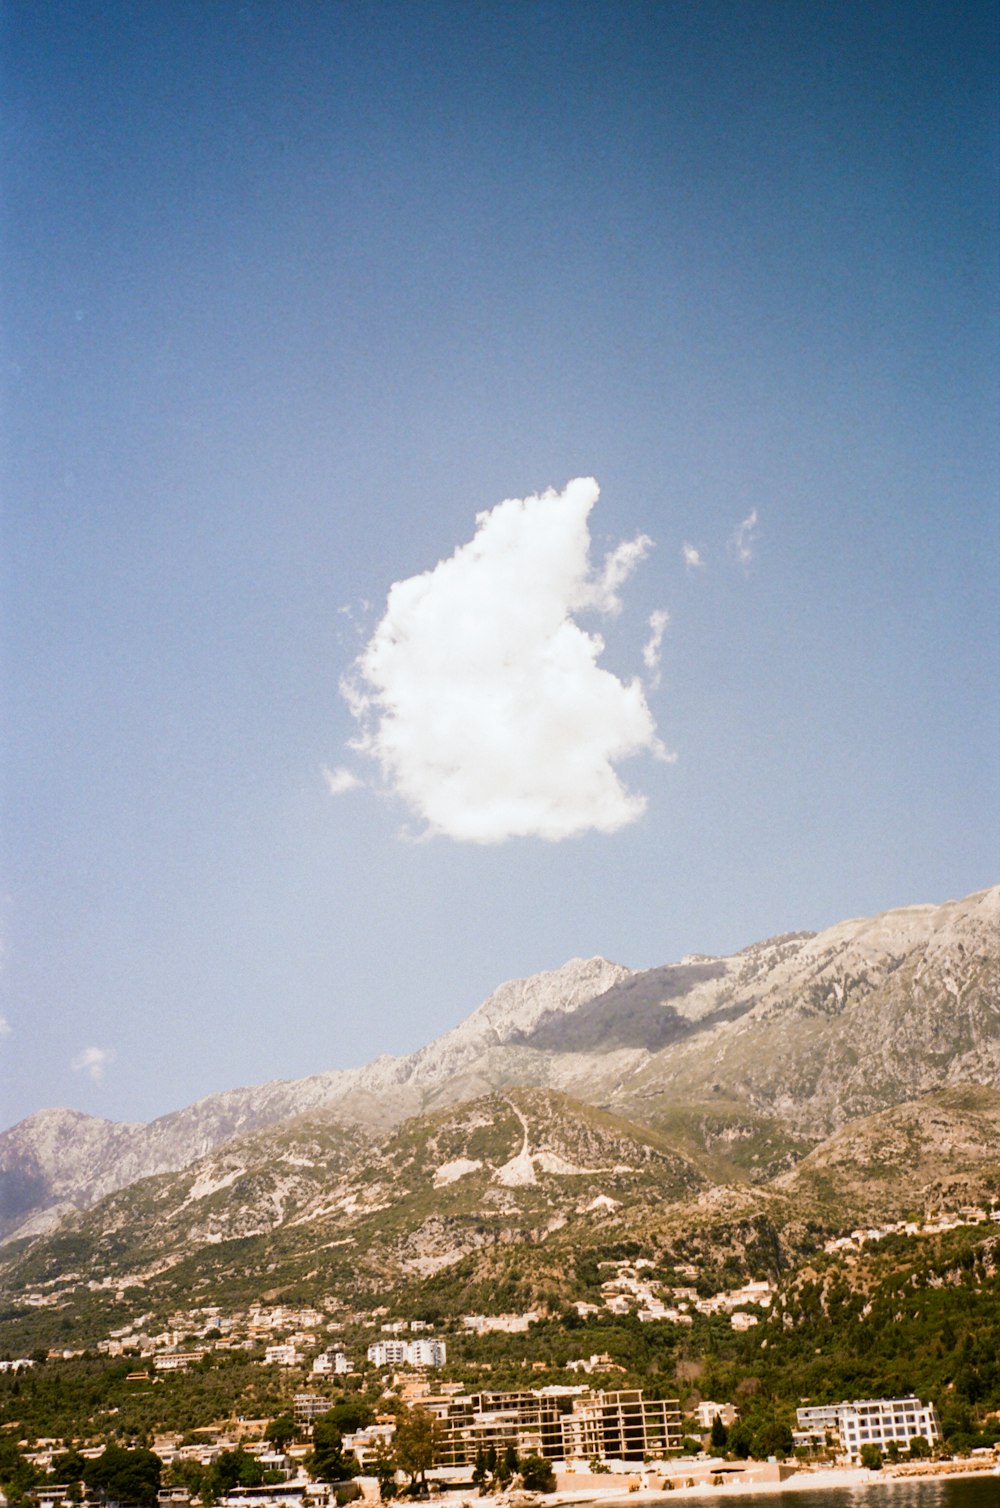 a large white cloud in the sky above a town